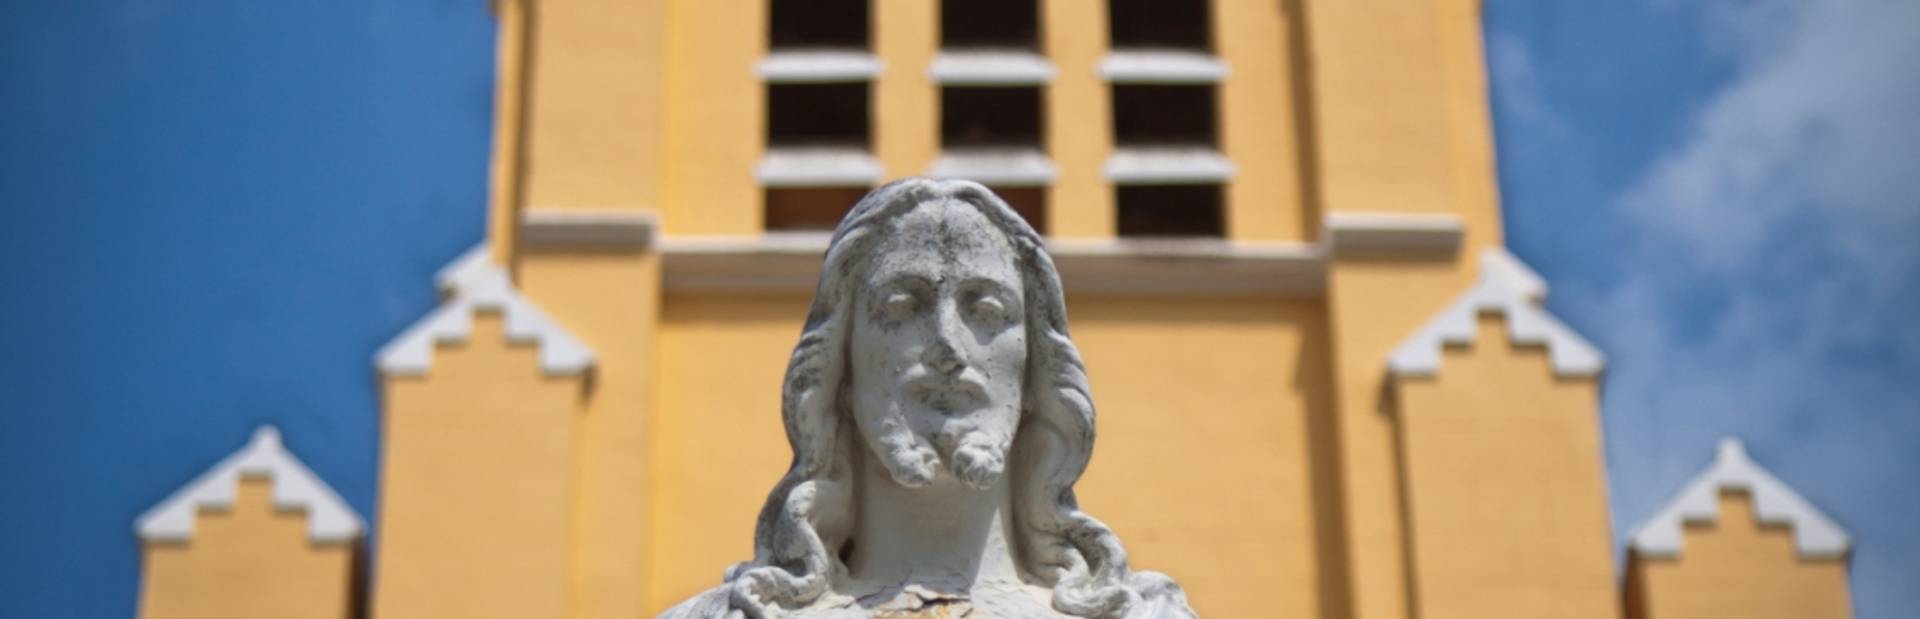 Statue of Jesus Christ and Church